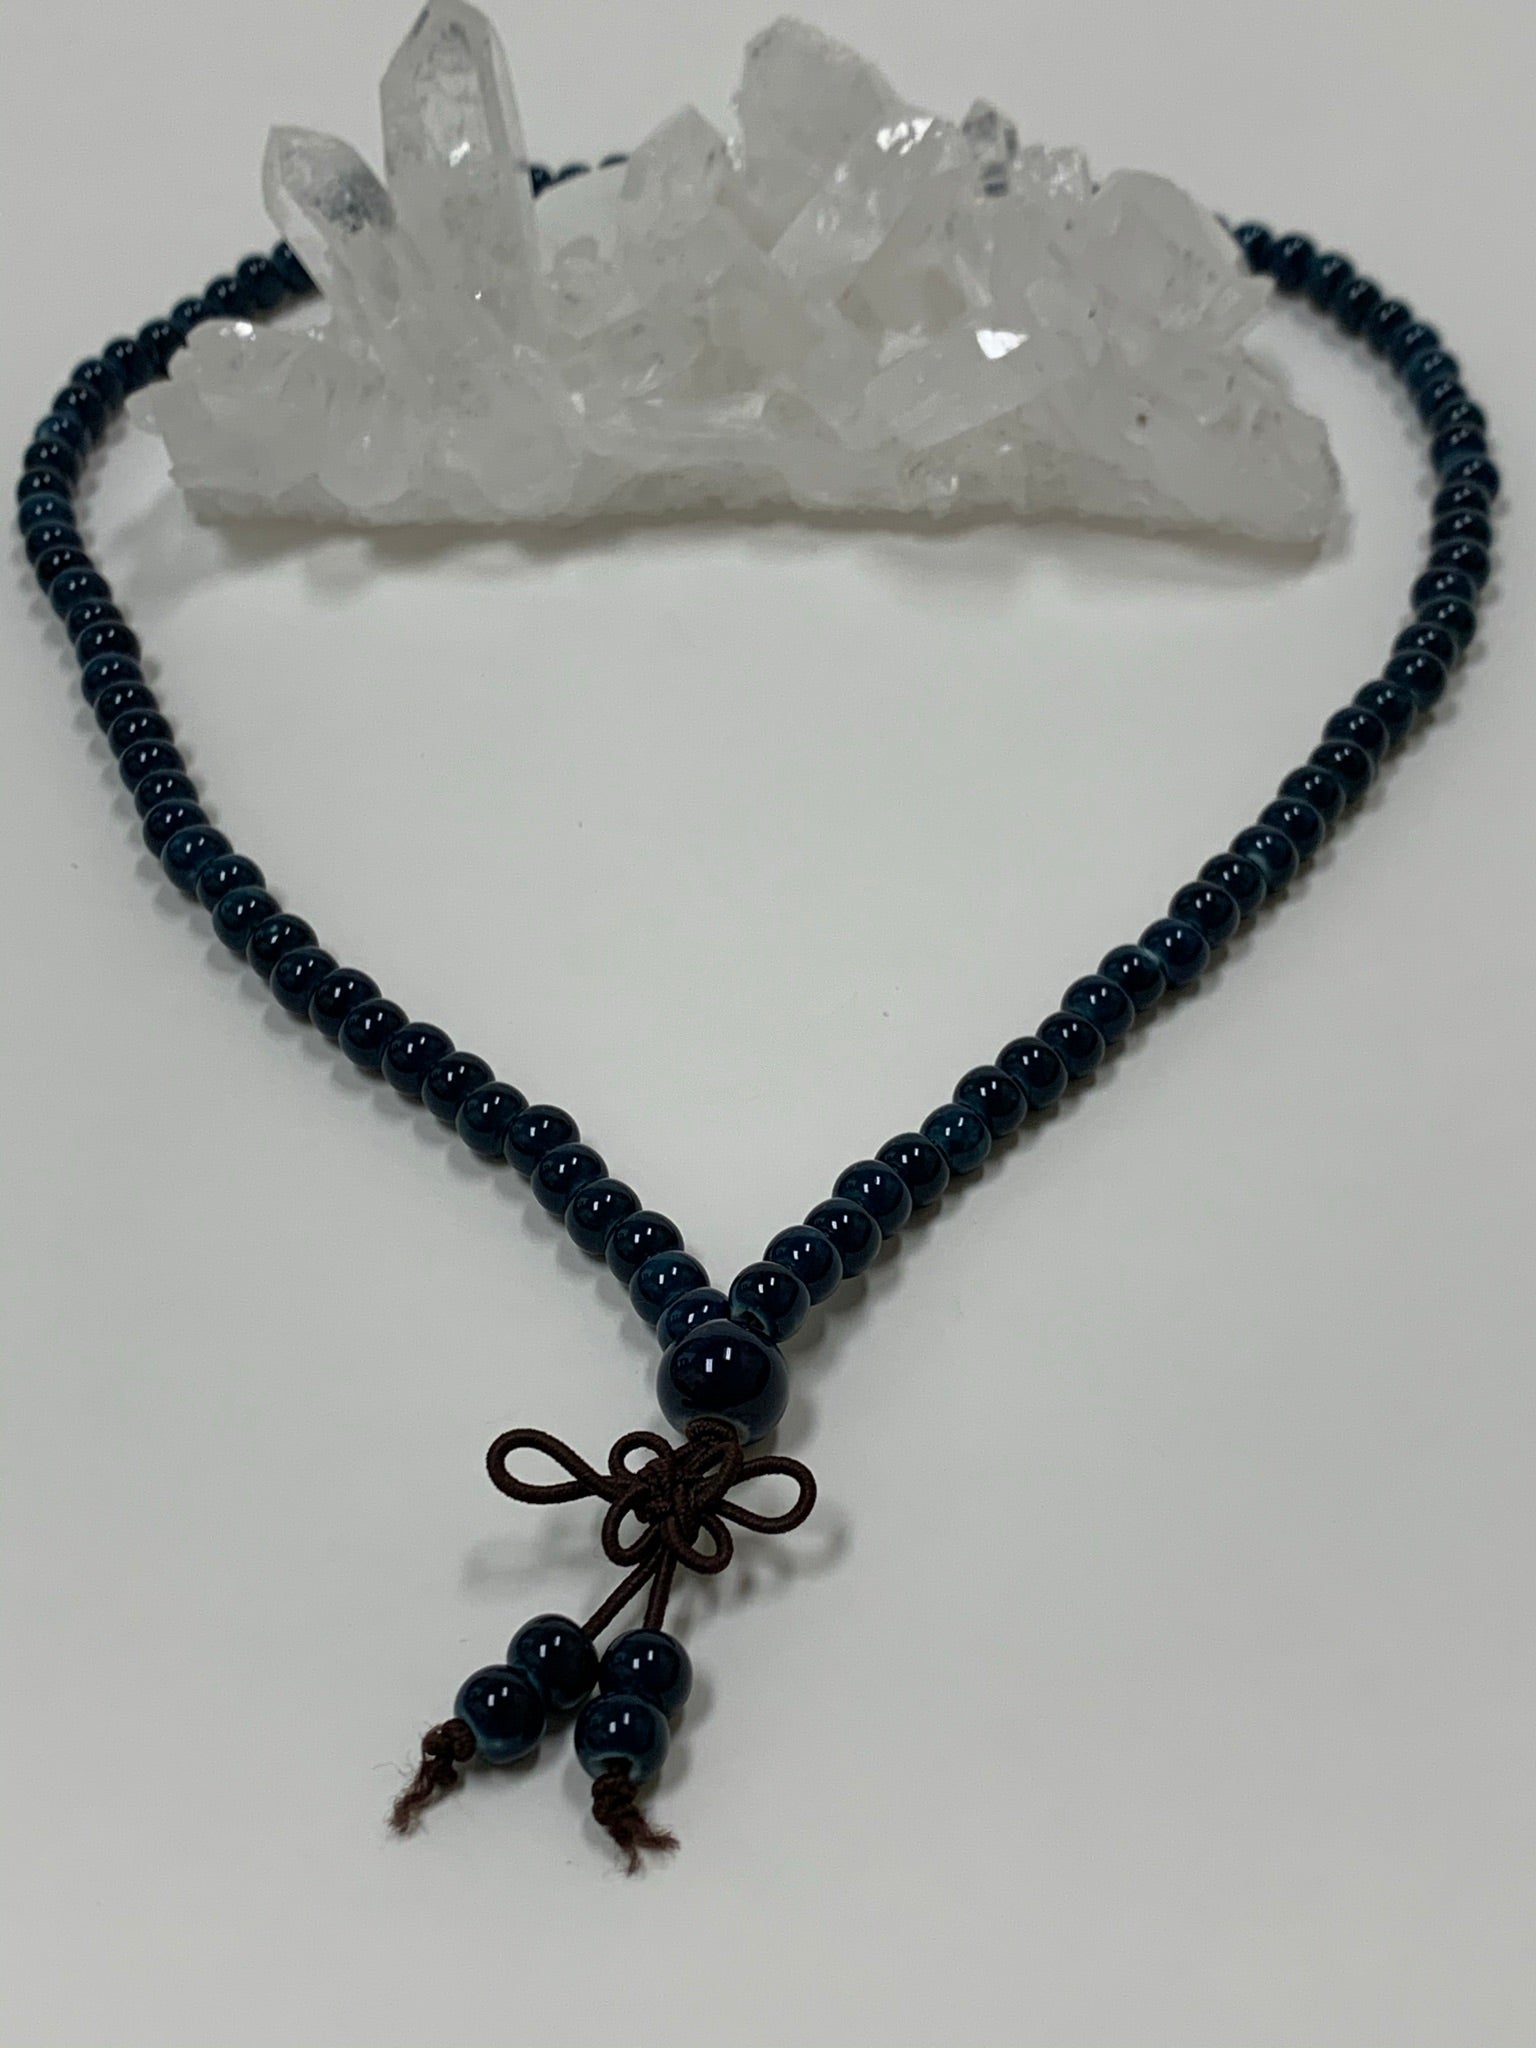 Second close-up view. Prayer beads/mala necklace consists of 108 small, blue ceramic beads. Used to count 108 repetitions of a mantra, so the user can pay attention to the sounds, vibrations and meaning of the mantra being chanted.